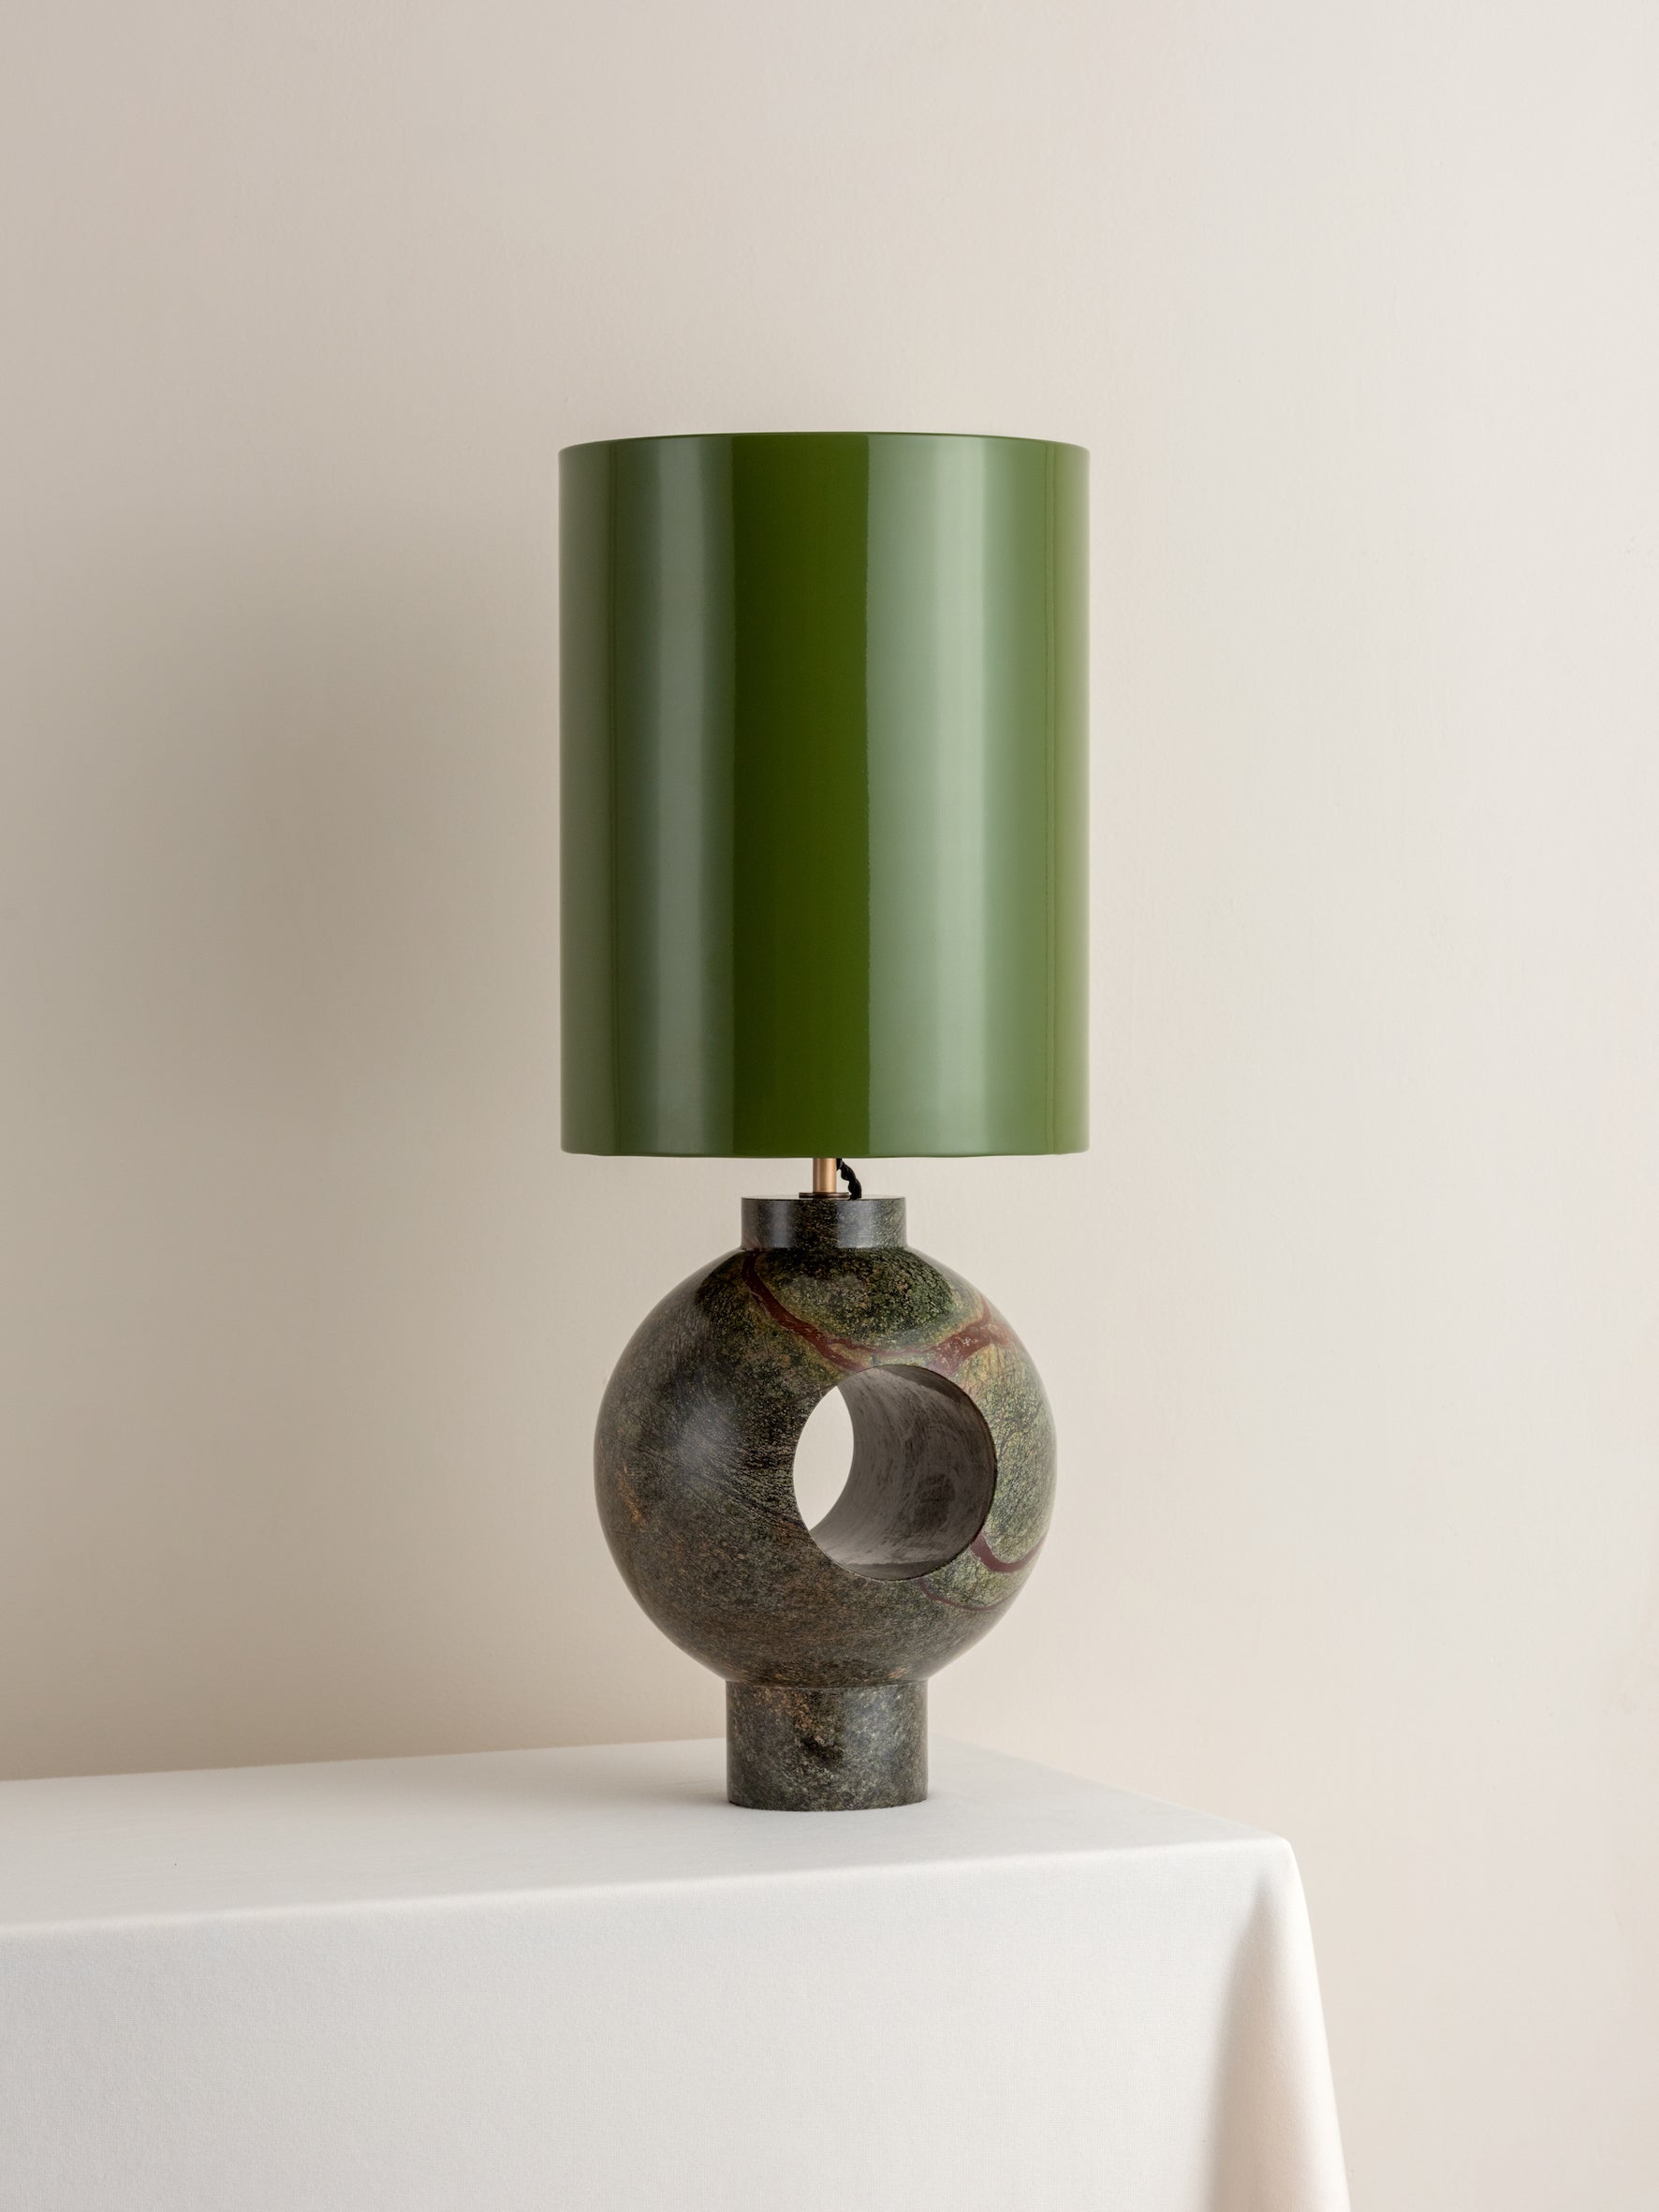 Editions marble lamp with + green lacquer shade | Table Lamp | Lights & Lamps Inc | Modern Affordable Designer Lighting | USA